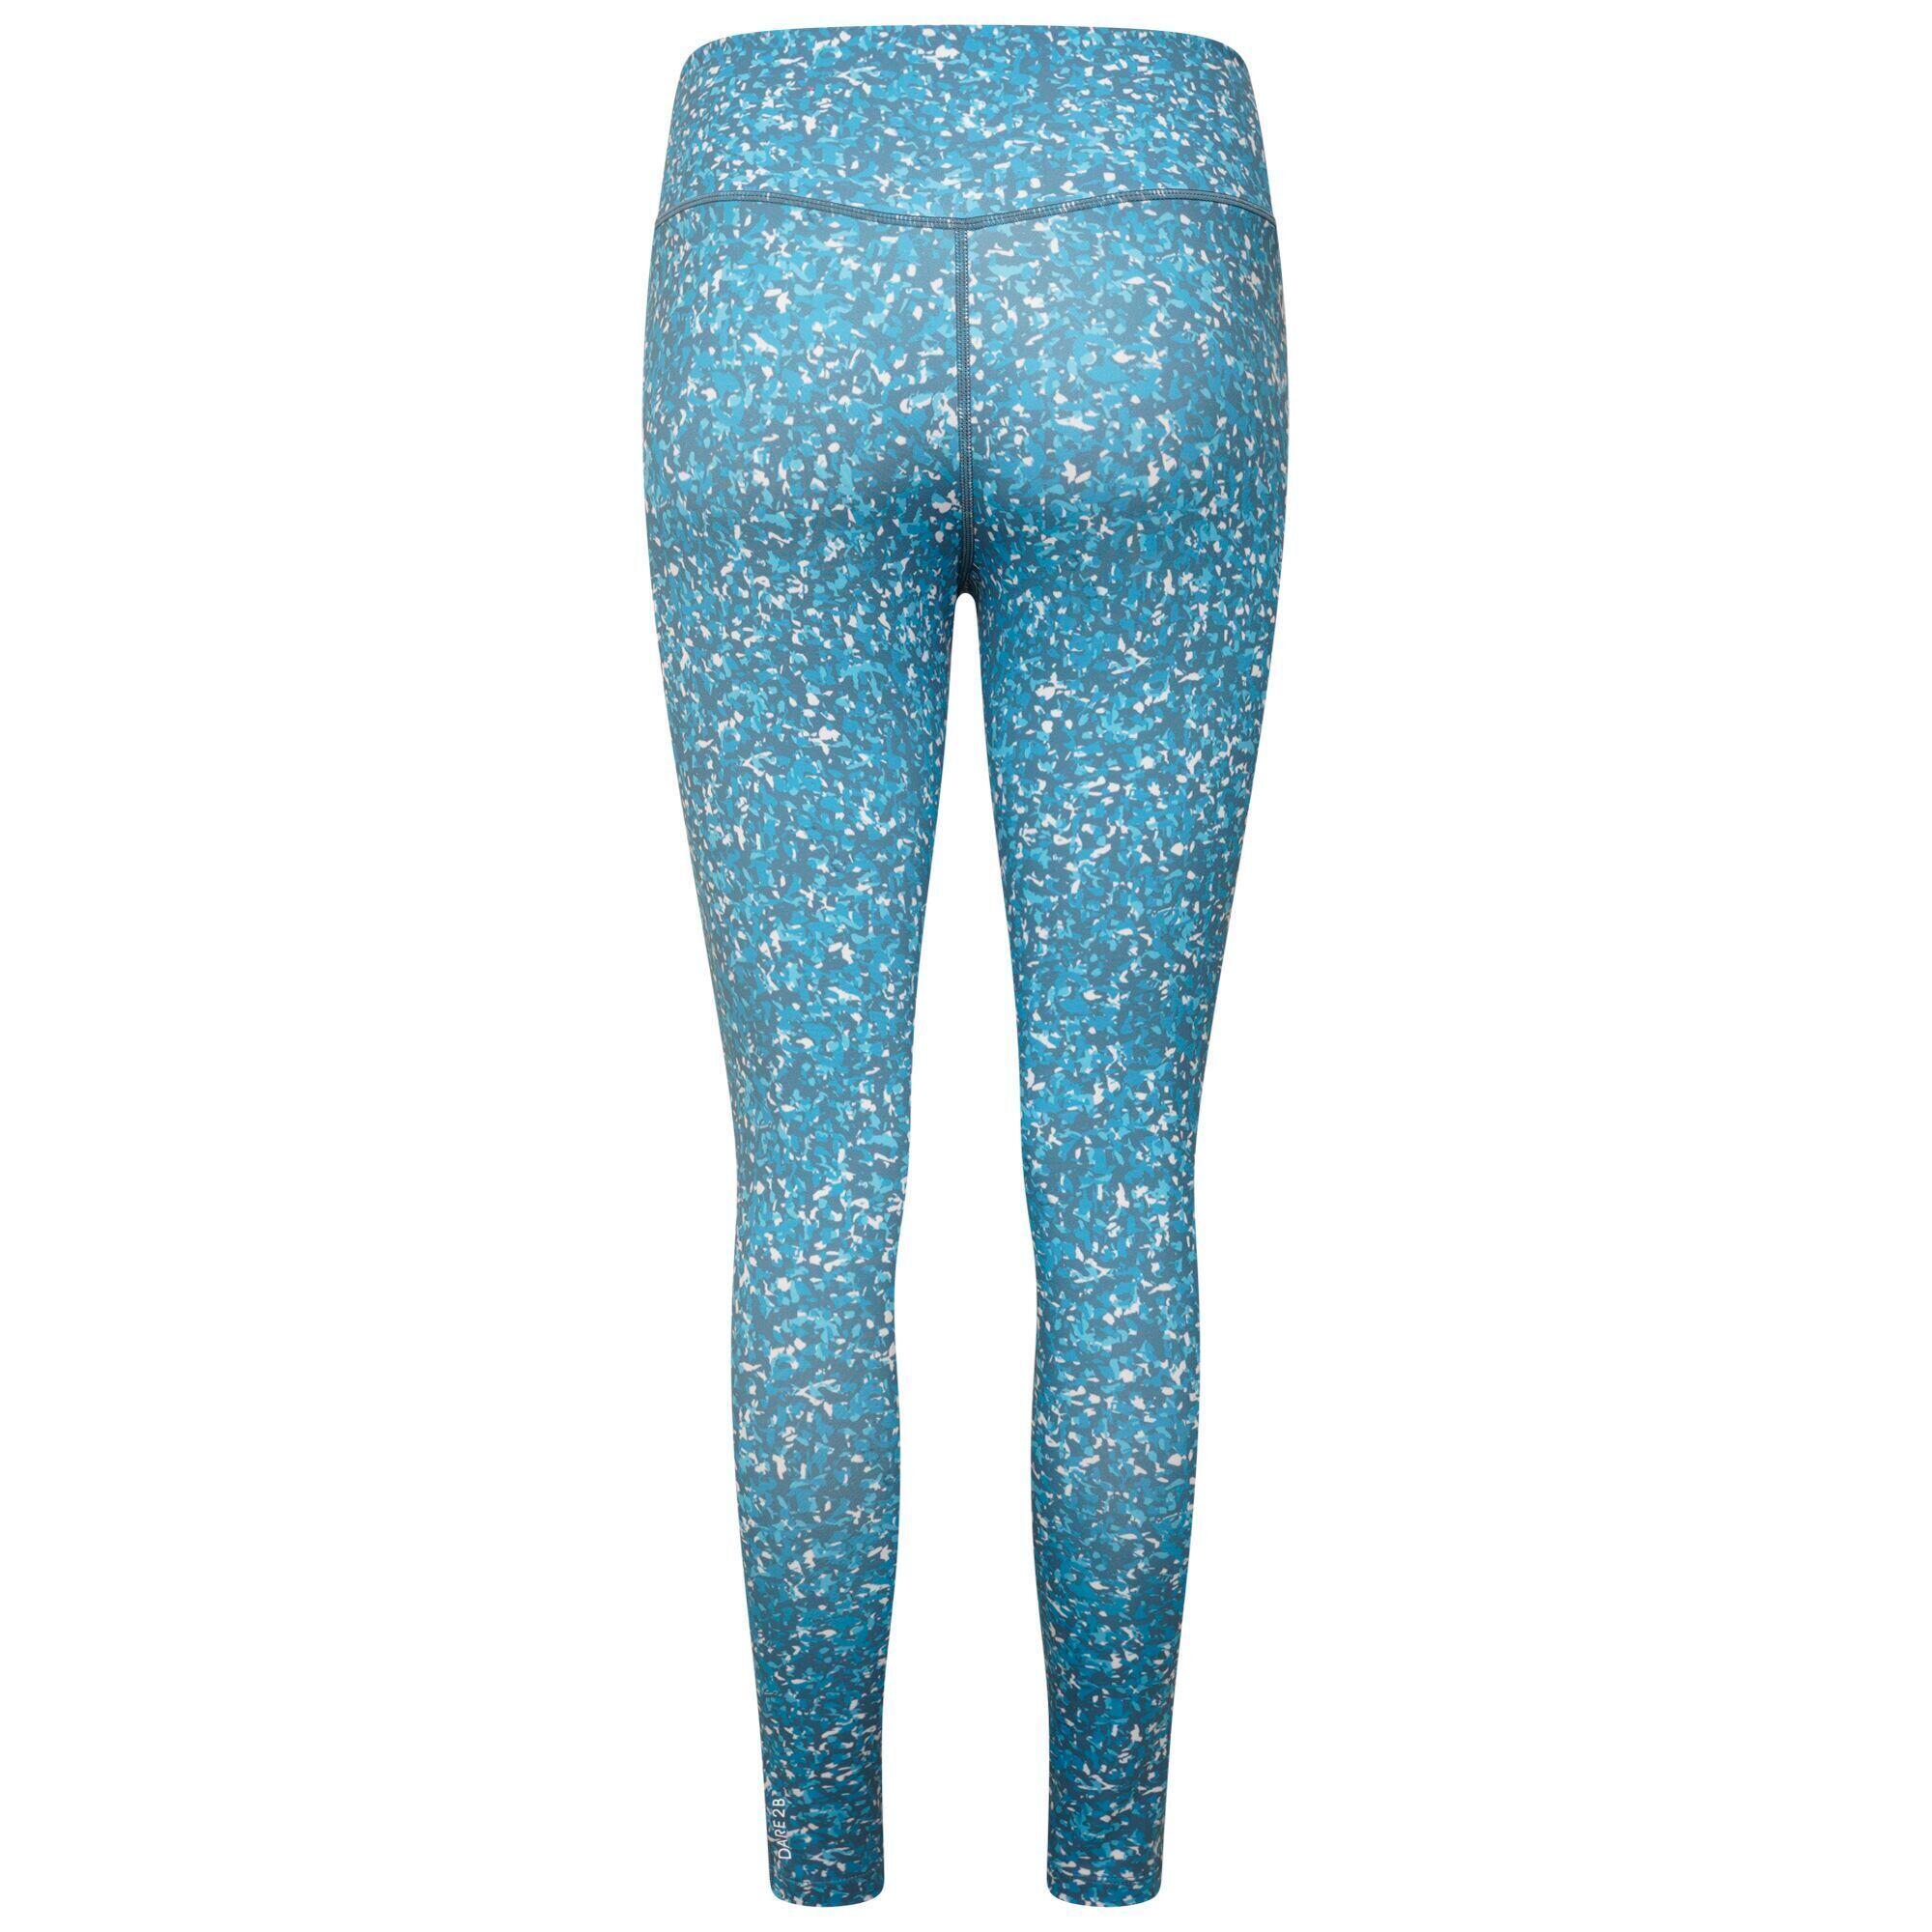 Womens/Ladies Influential Fracture Print Recycled Jeggings (Capri Blue) 2/5